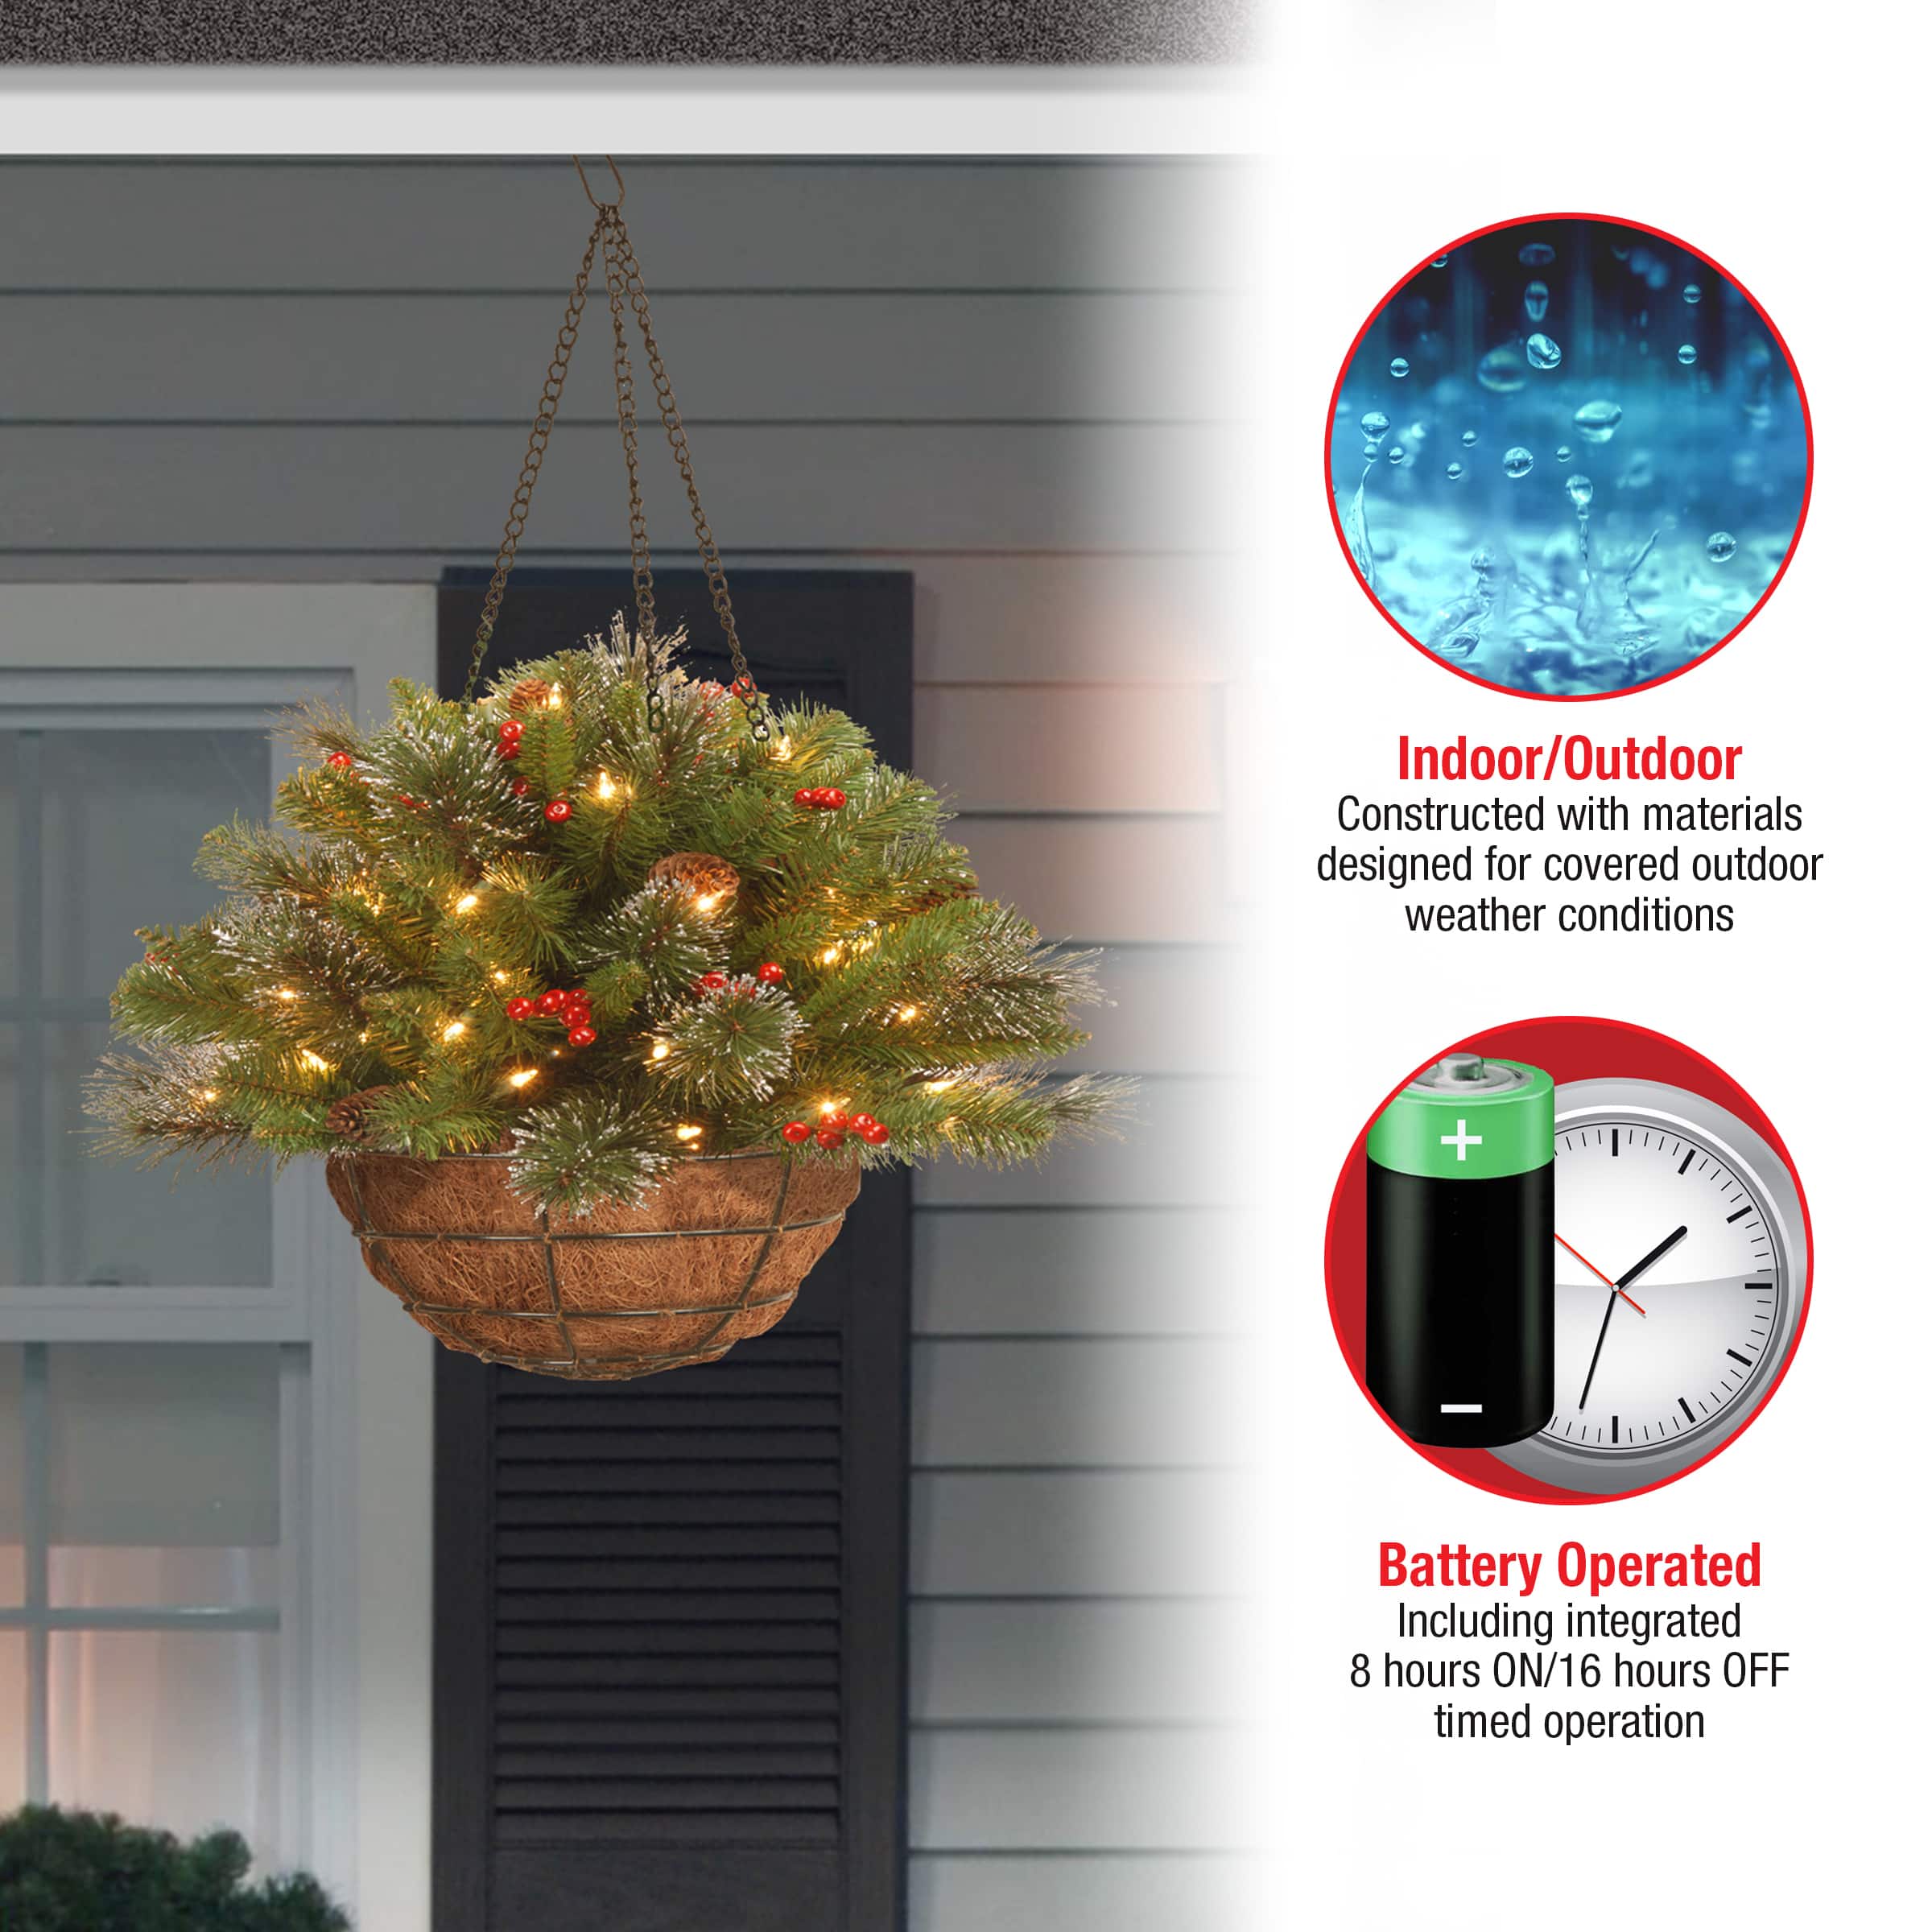 20&#x22; Pre-lit Crestwood Spruce Artificial Christmas Chain Hanging Basket with Silver Bristle, Cones, Red Berries, Glitter, Coconut Fiber in Basket with LED Lights